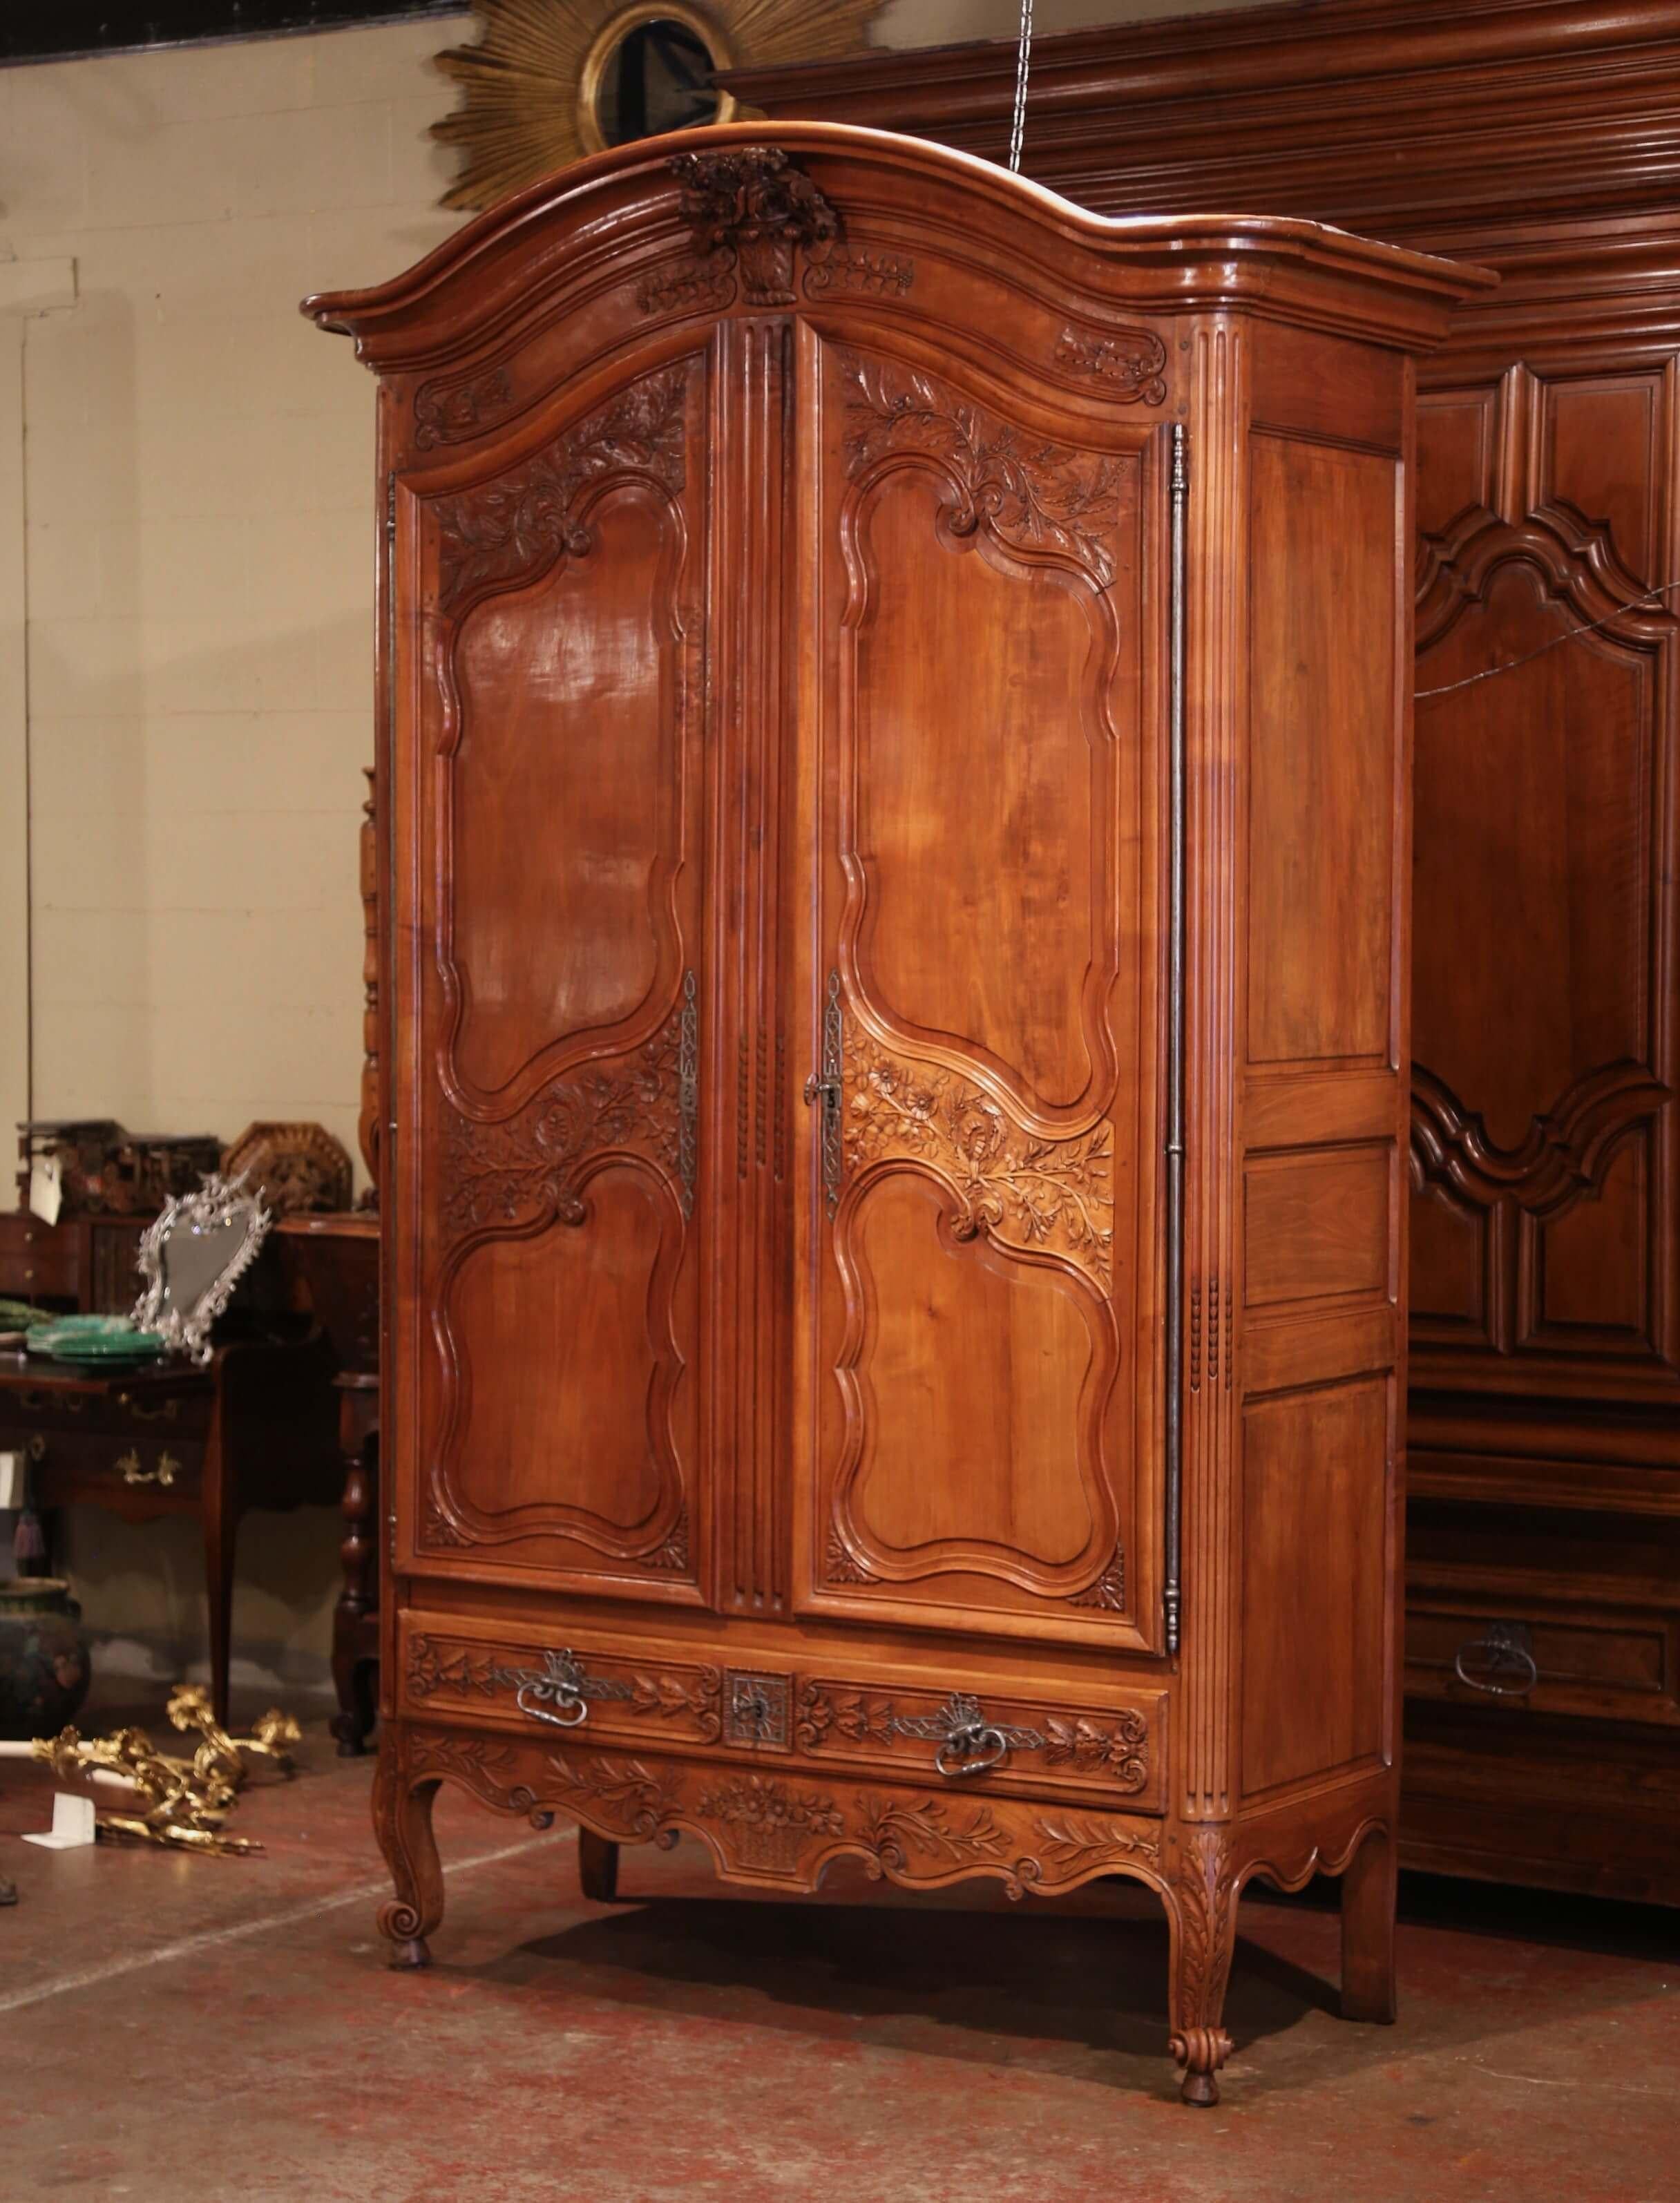 Patinated 18th Century French Louis XV Carved Cherry Two-Door Armoire from Poitou Region